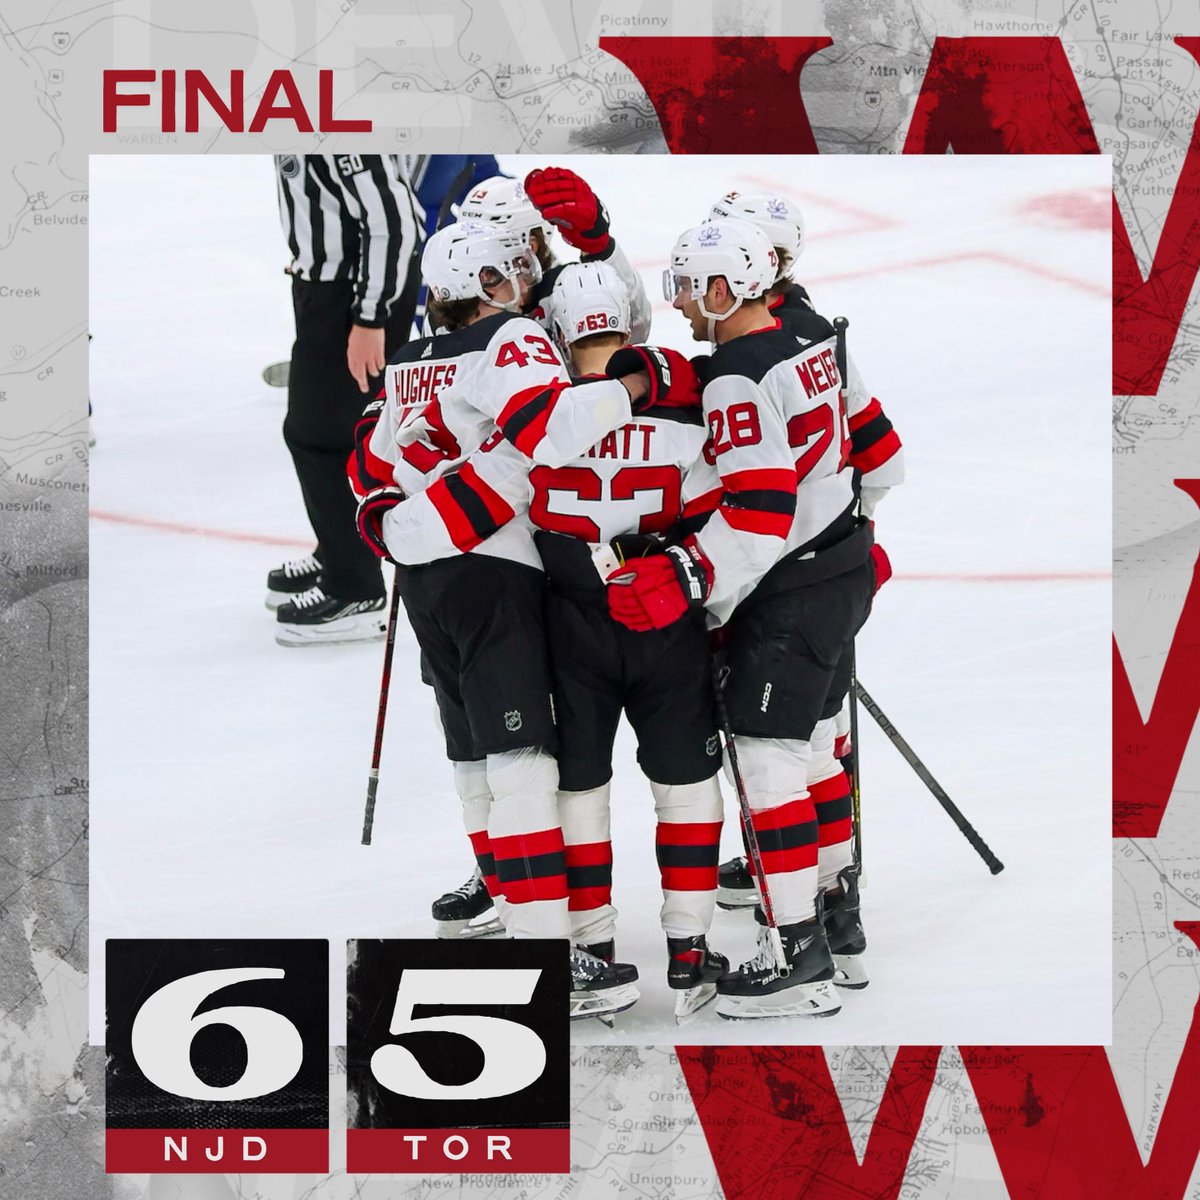 Six goals in the Six. 

Game Story: bit.ly/43XR7wy